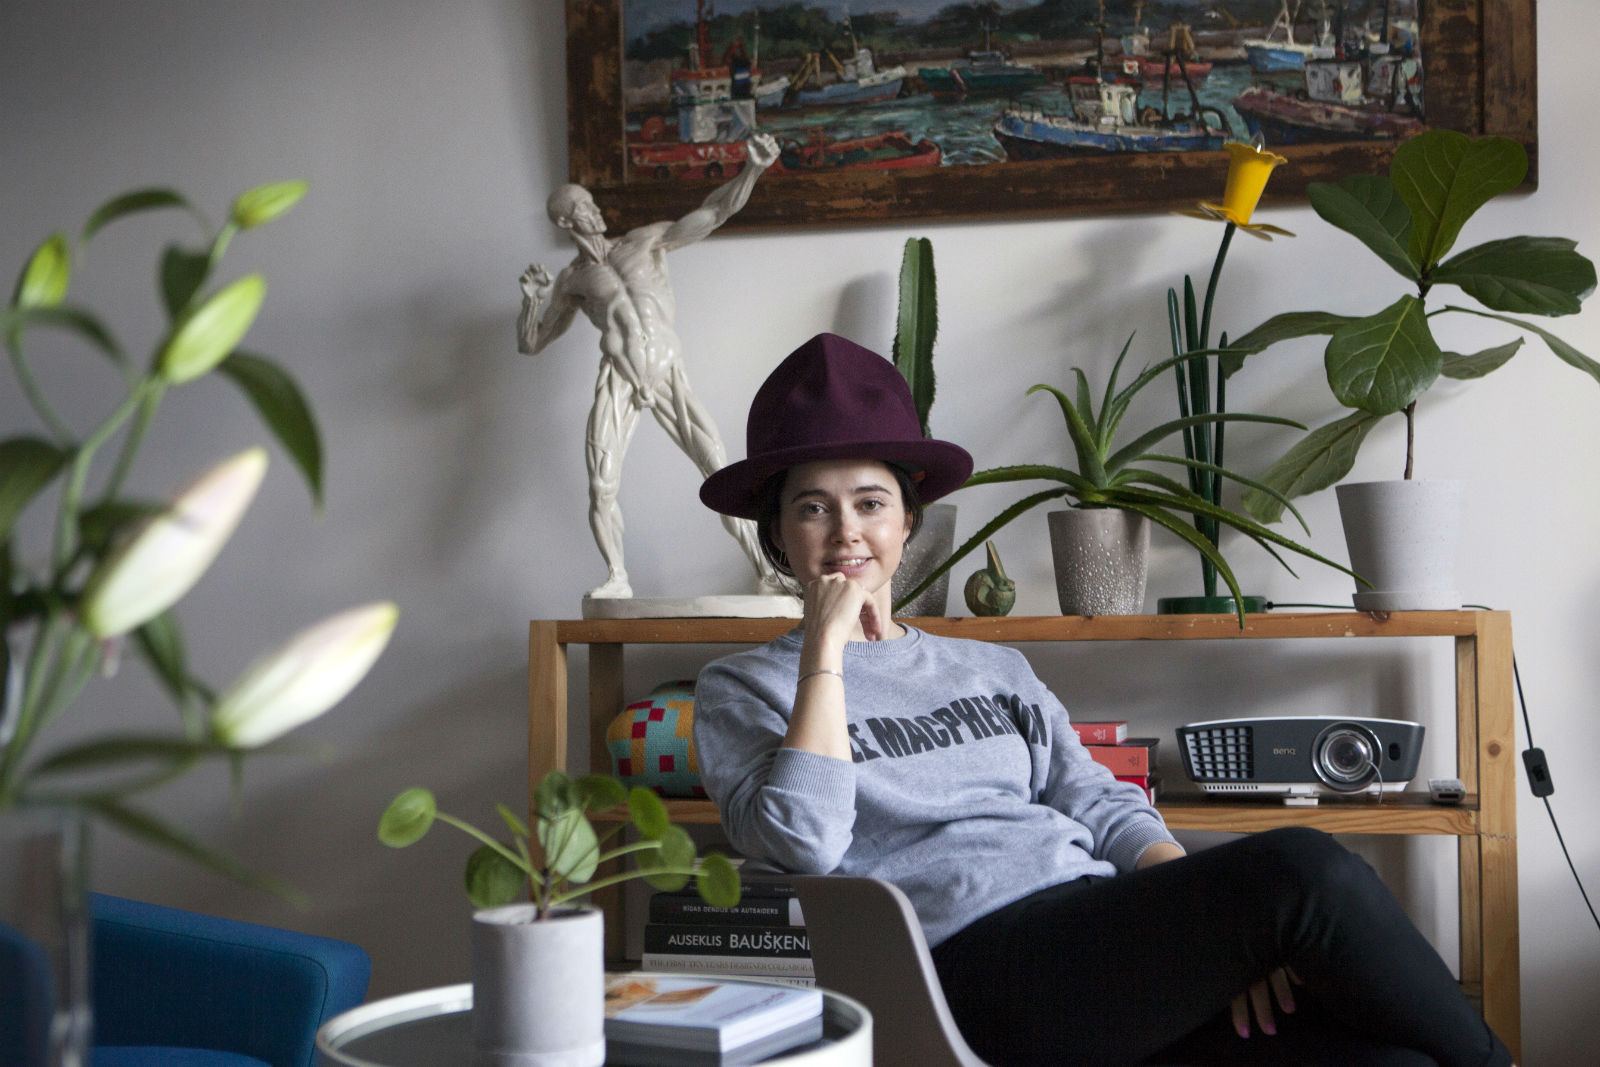 Agnese Kleina, visual journalist, publisher and editor-in-chief of Benji Knewman, in her apartment